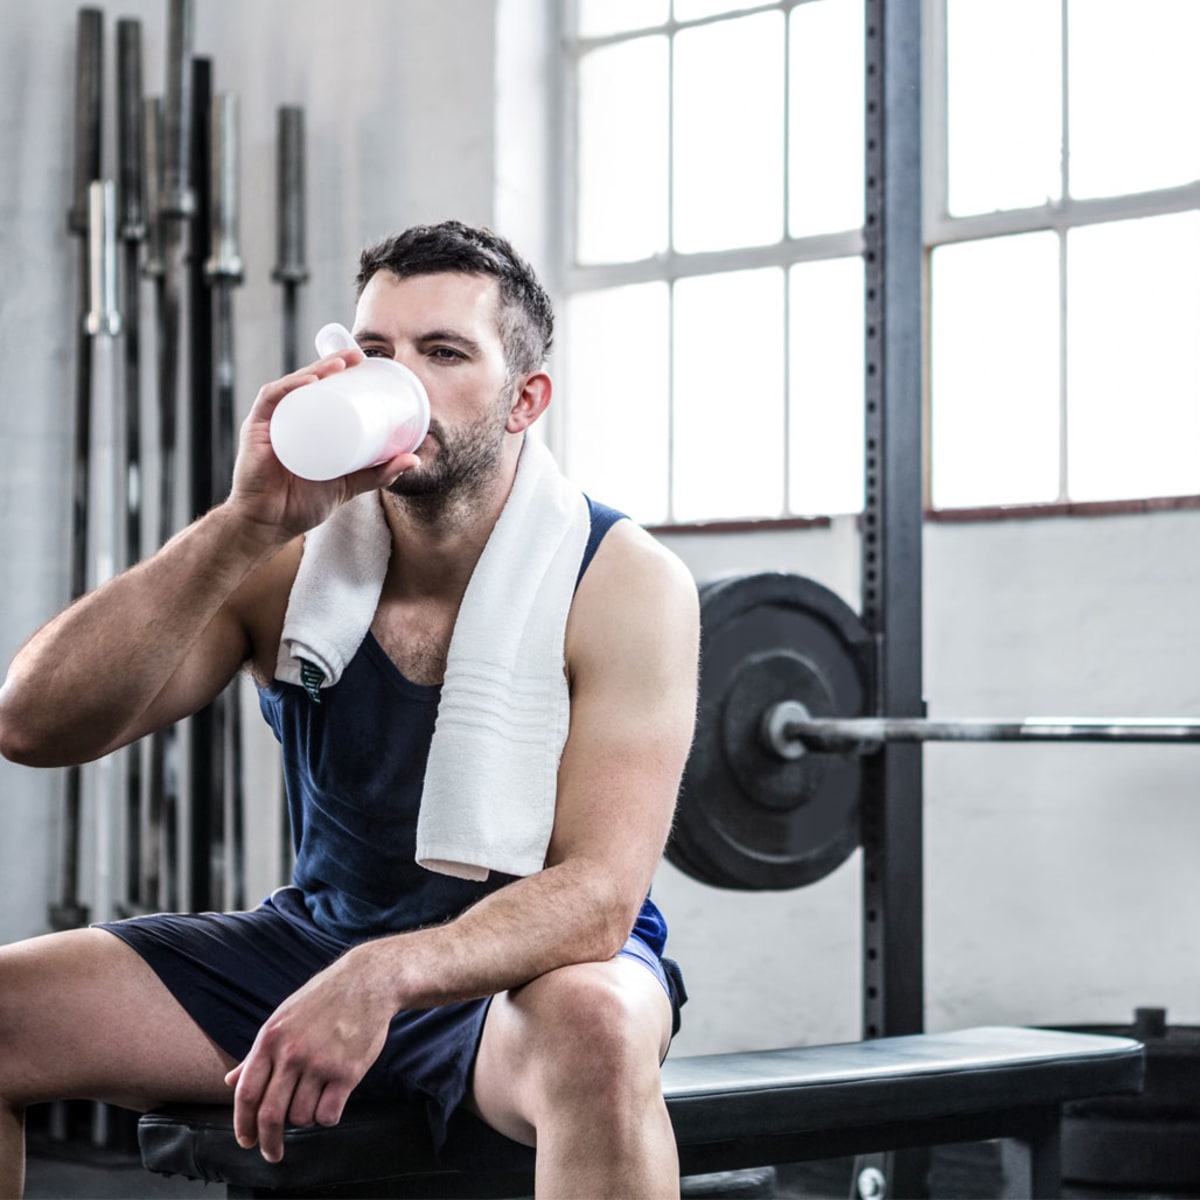 Pro Shake: the protein shake Ideal for Rapid Recovery.